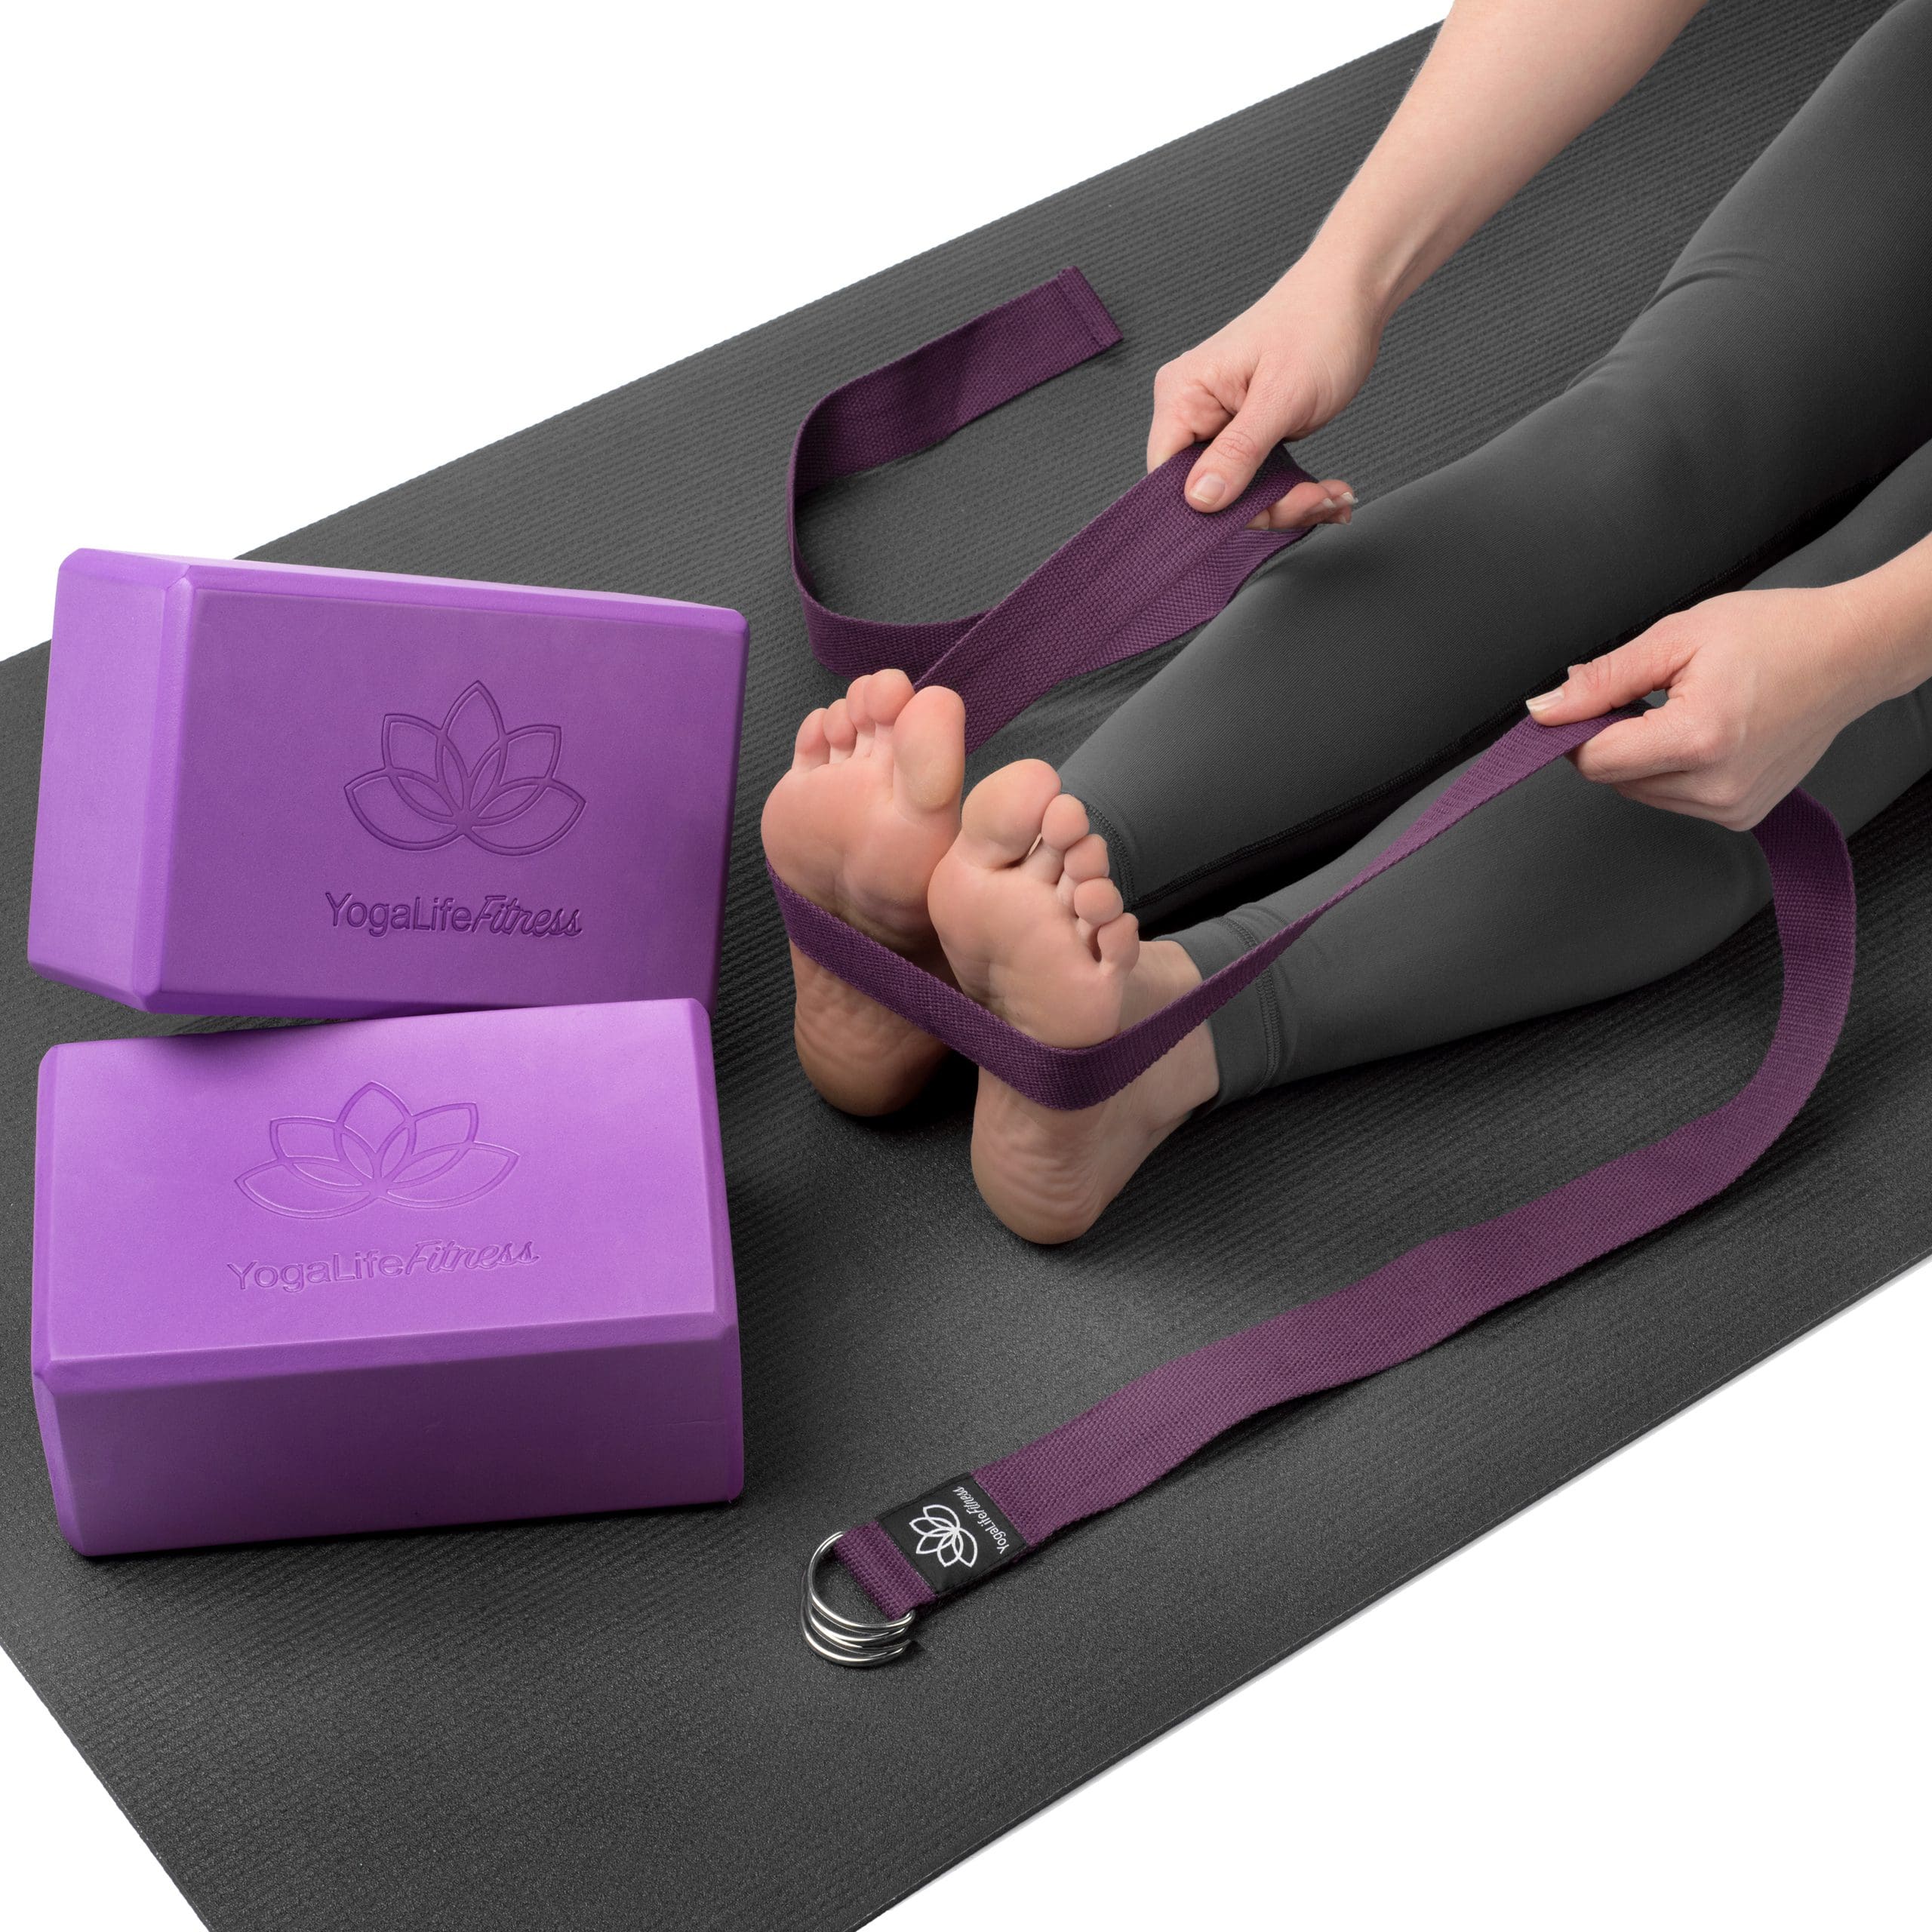 A foot model on a yoga mat with purple foam blocks and a purple strap.